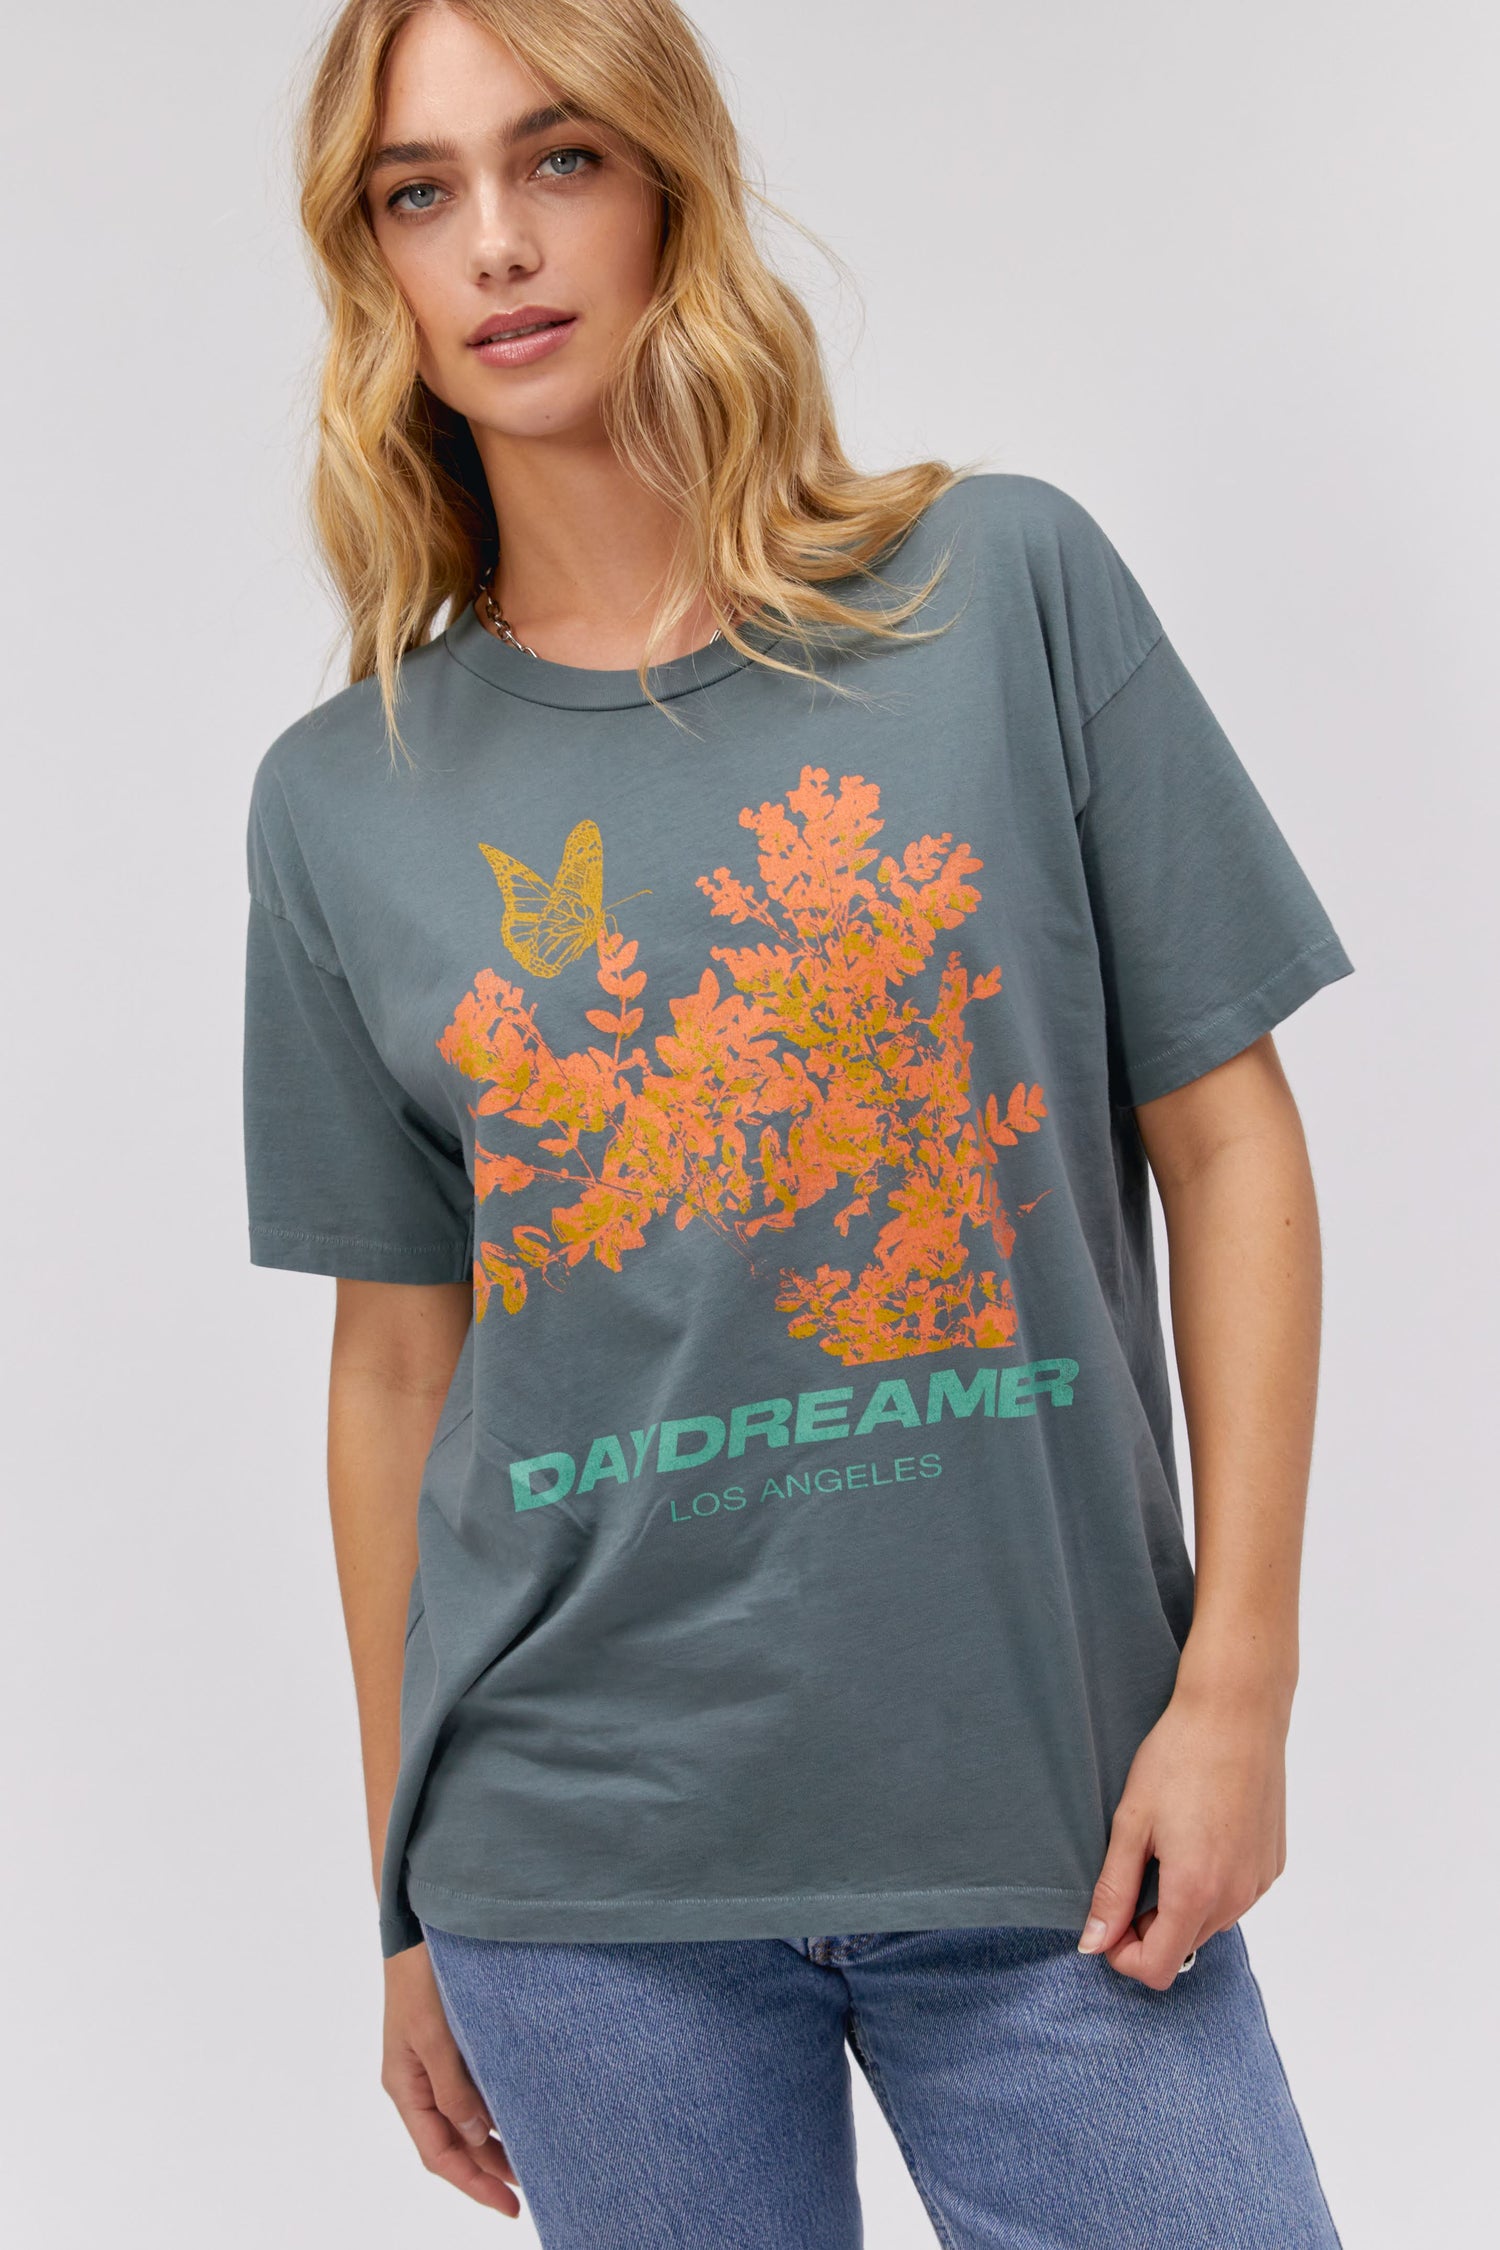 A blonde-haired model featuring a grey tee stamped with 'Daydreamer Los Angeles', a graphic of leaves and butterflies in orange, the same at the back but stamped with 'Bloom'.